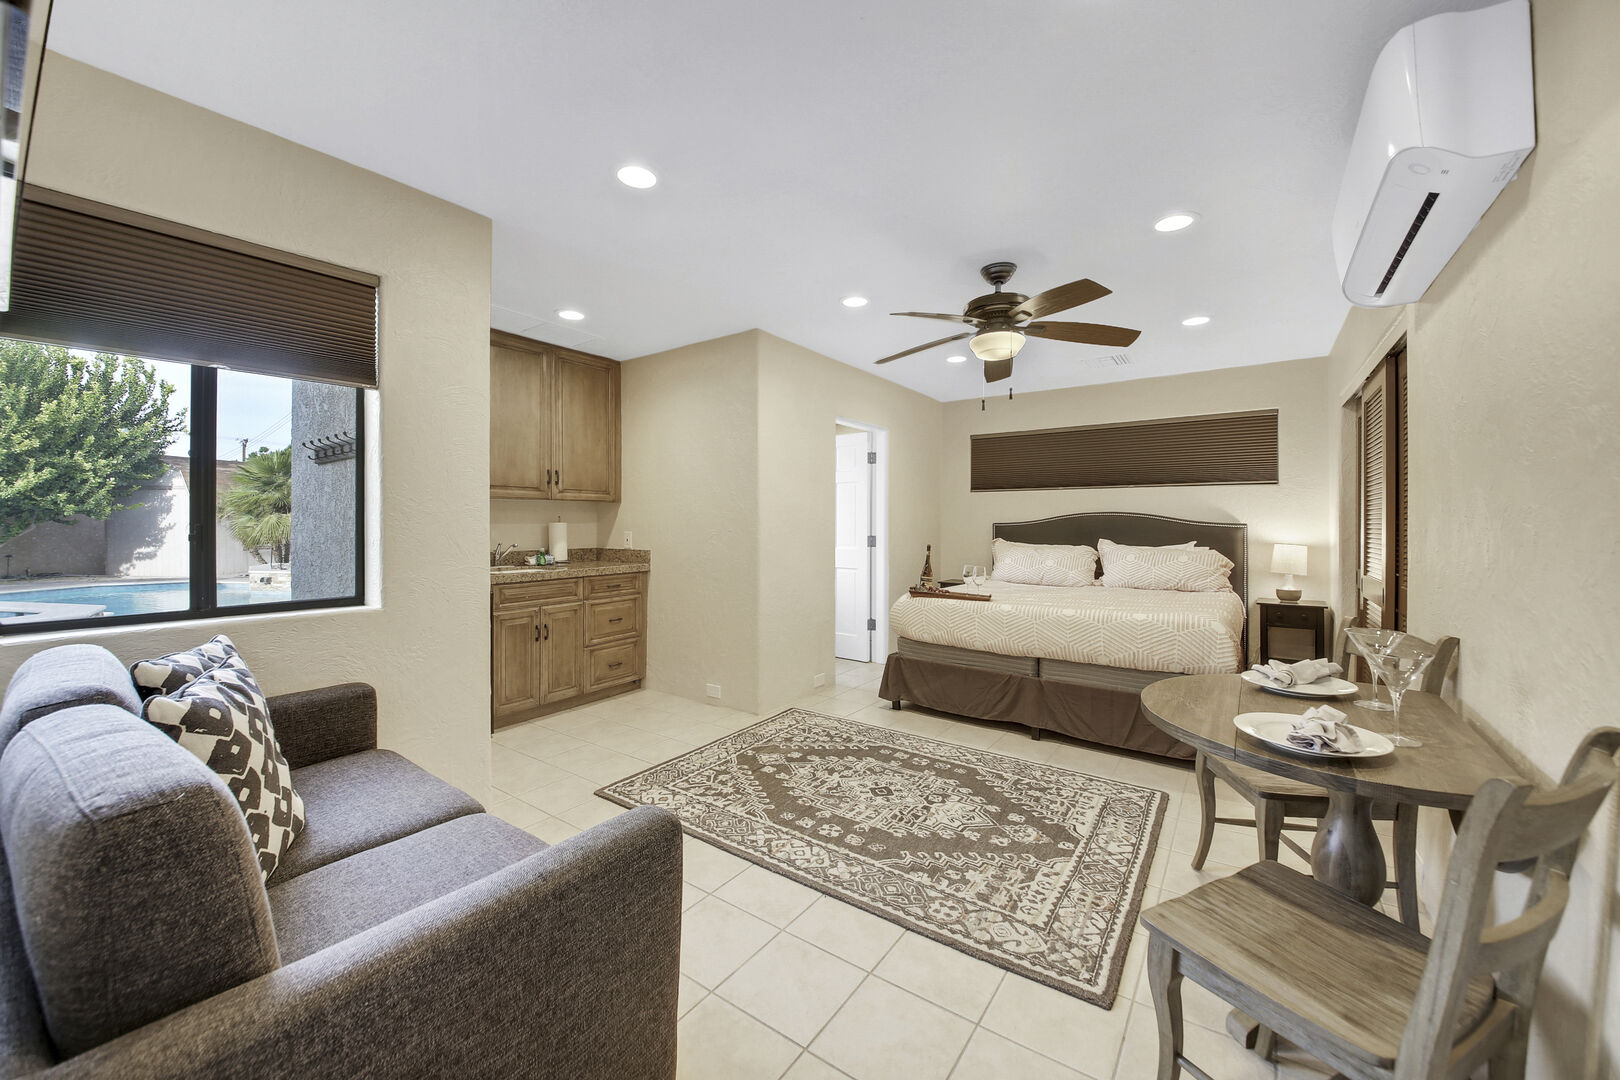 Casita Suite 2 is located near the garage and features a King-sized Bed, a Queen-sized Sofa Sleeper.